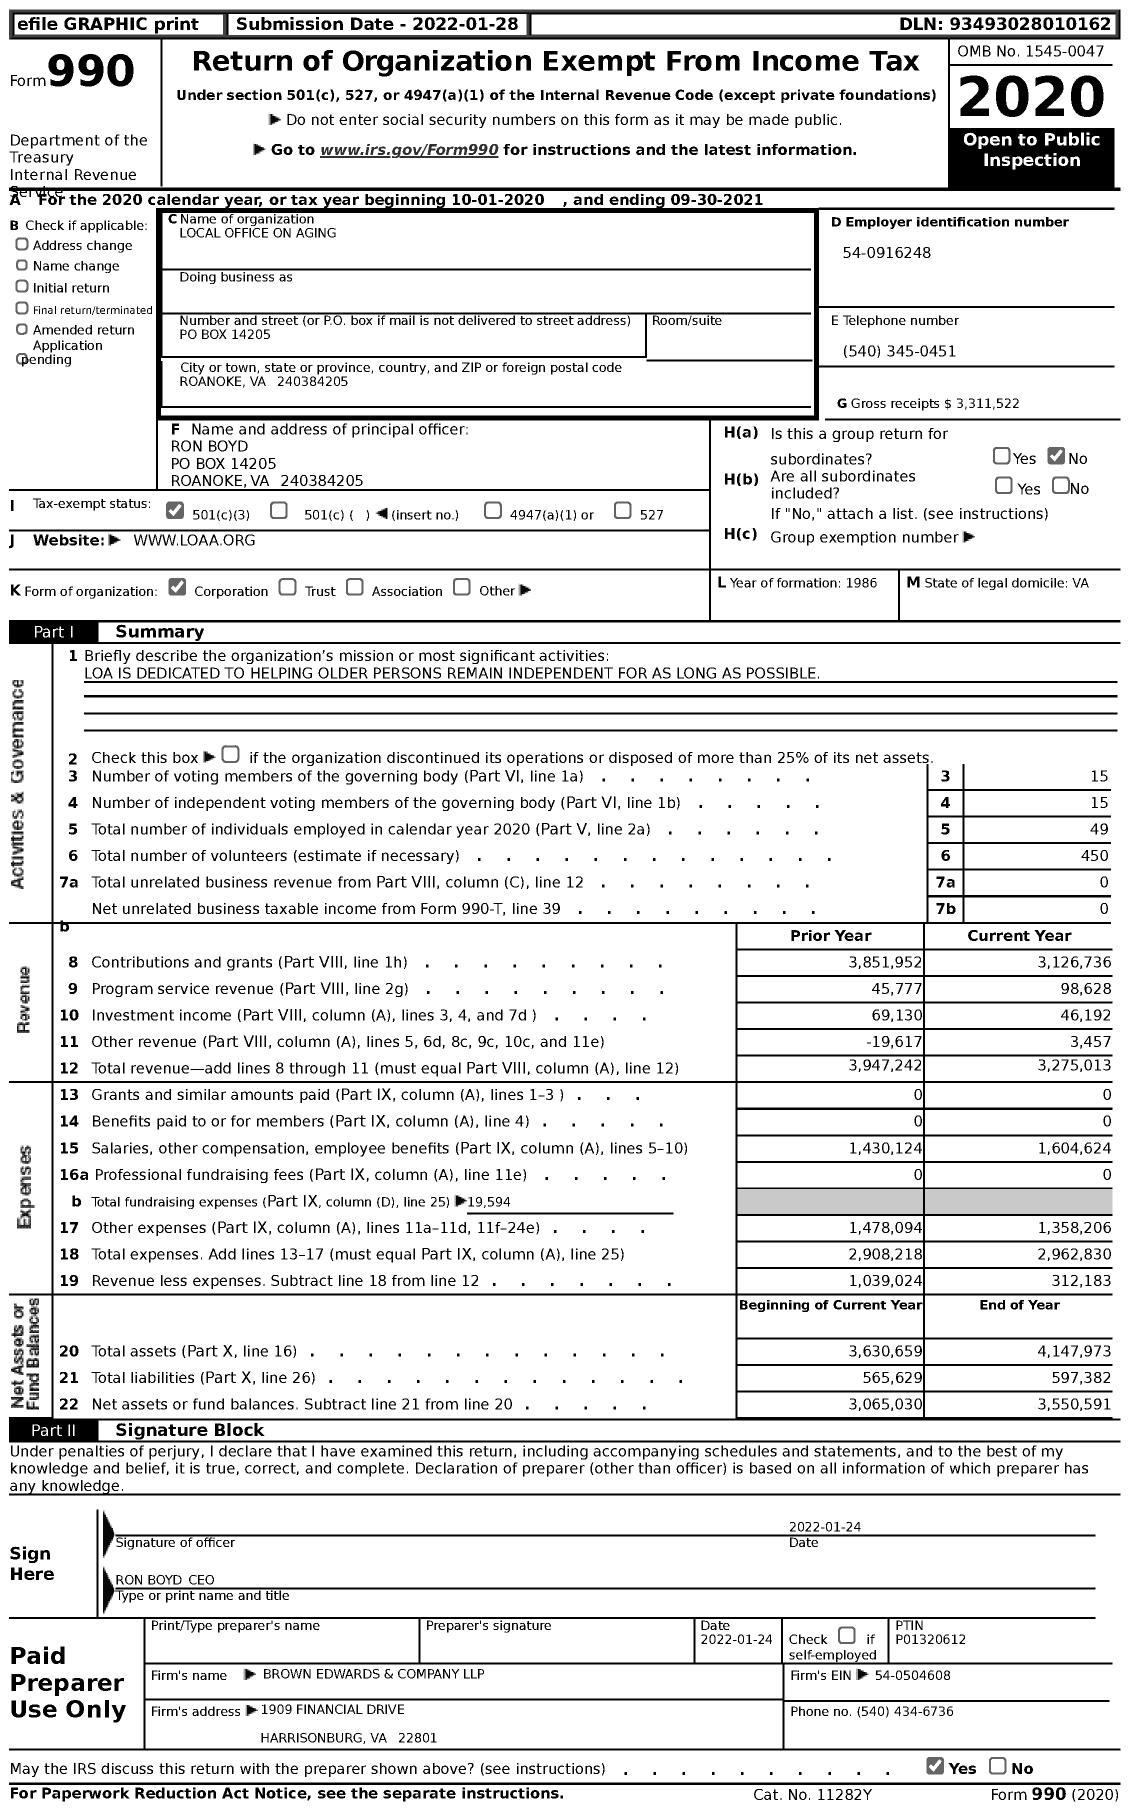 Image of first page of 2020 Form 990 for Local Office on Aging (LOA)